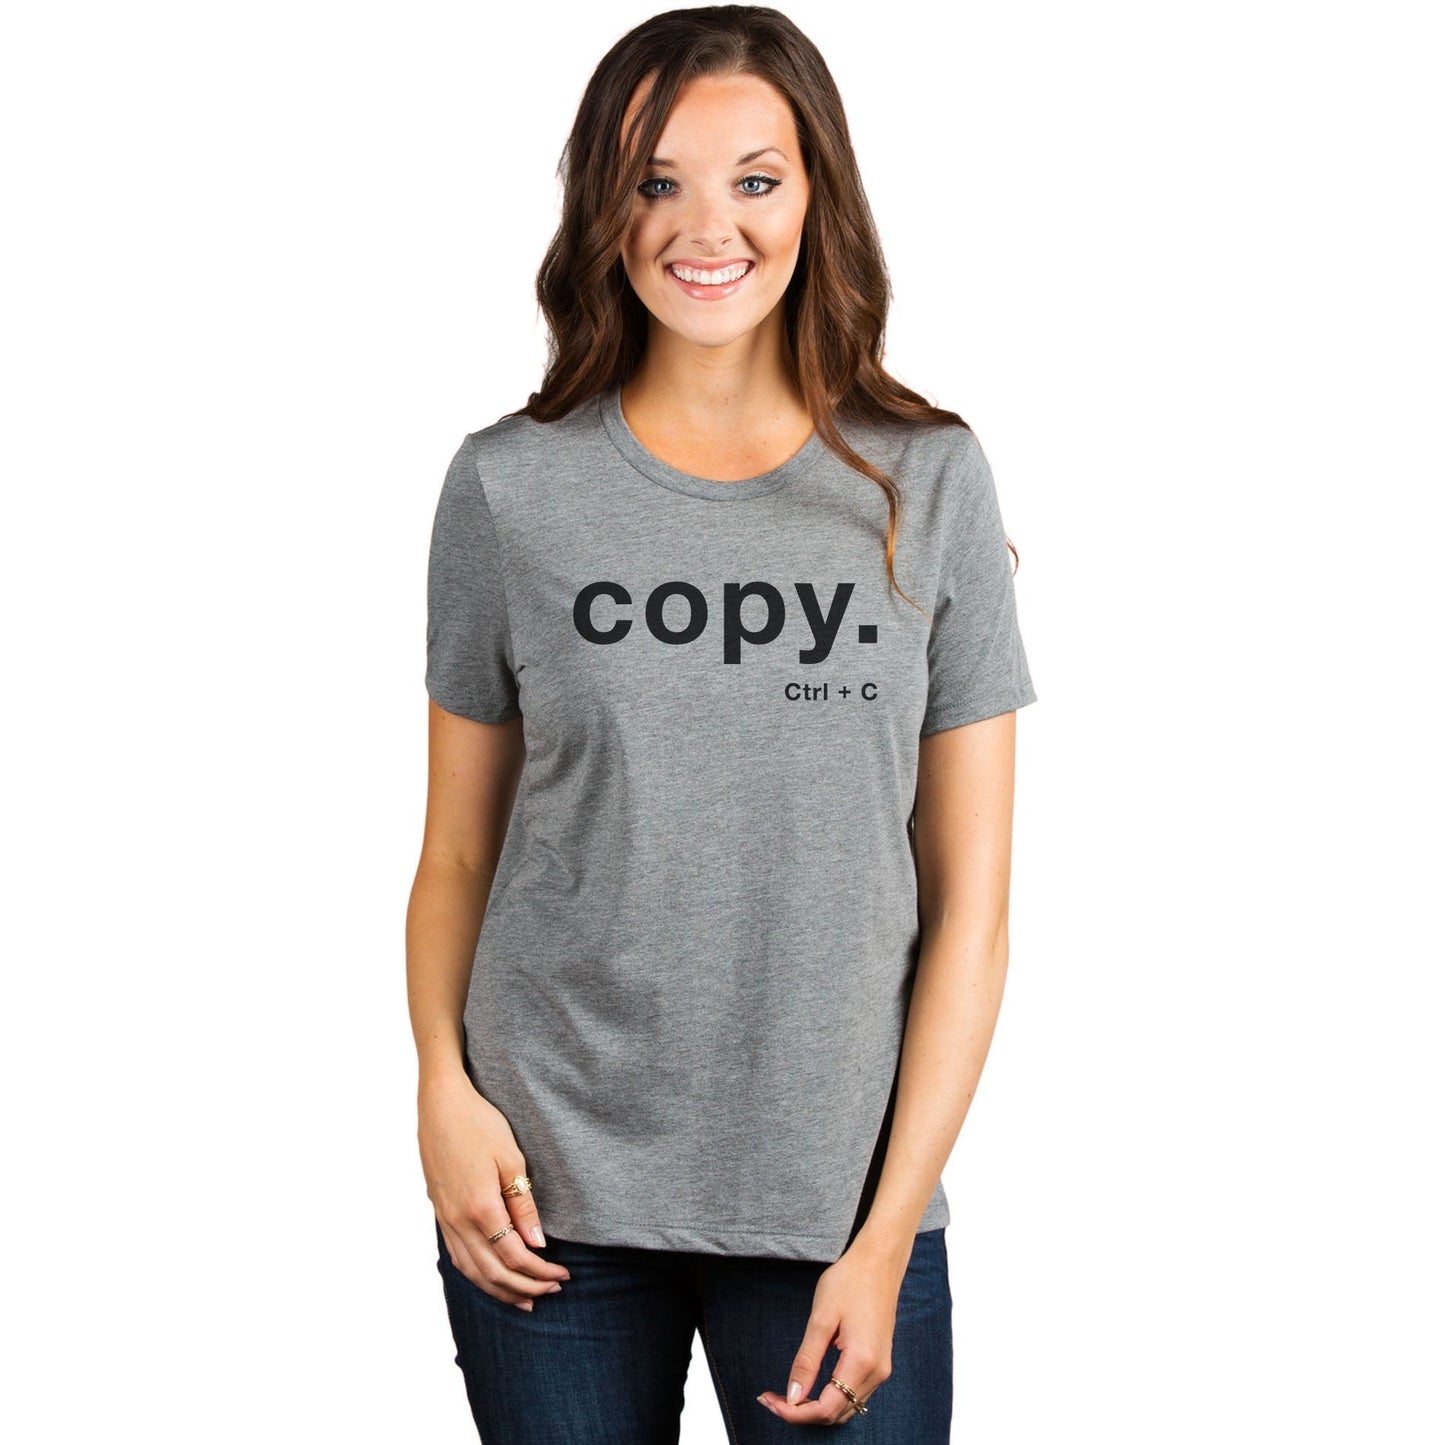 Copy CTRL C - Thread Tank | Stories You Can Wear | T-Shirts, Tank Tops and Sweatshirts